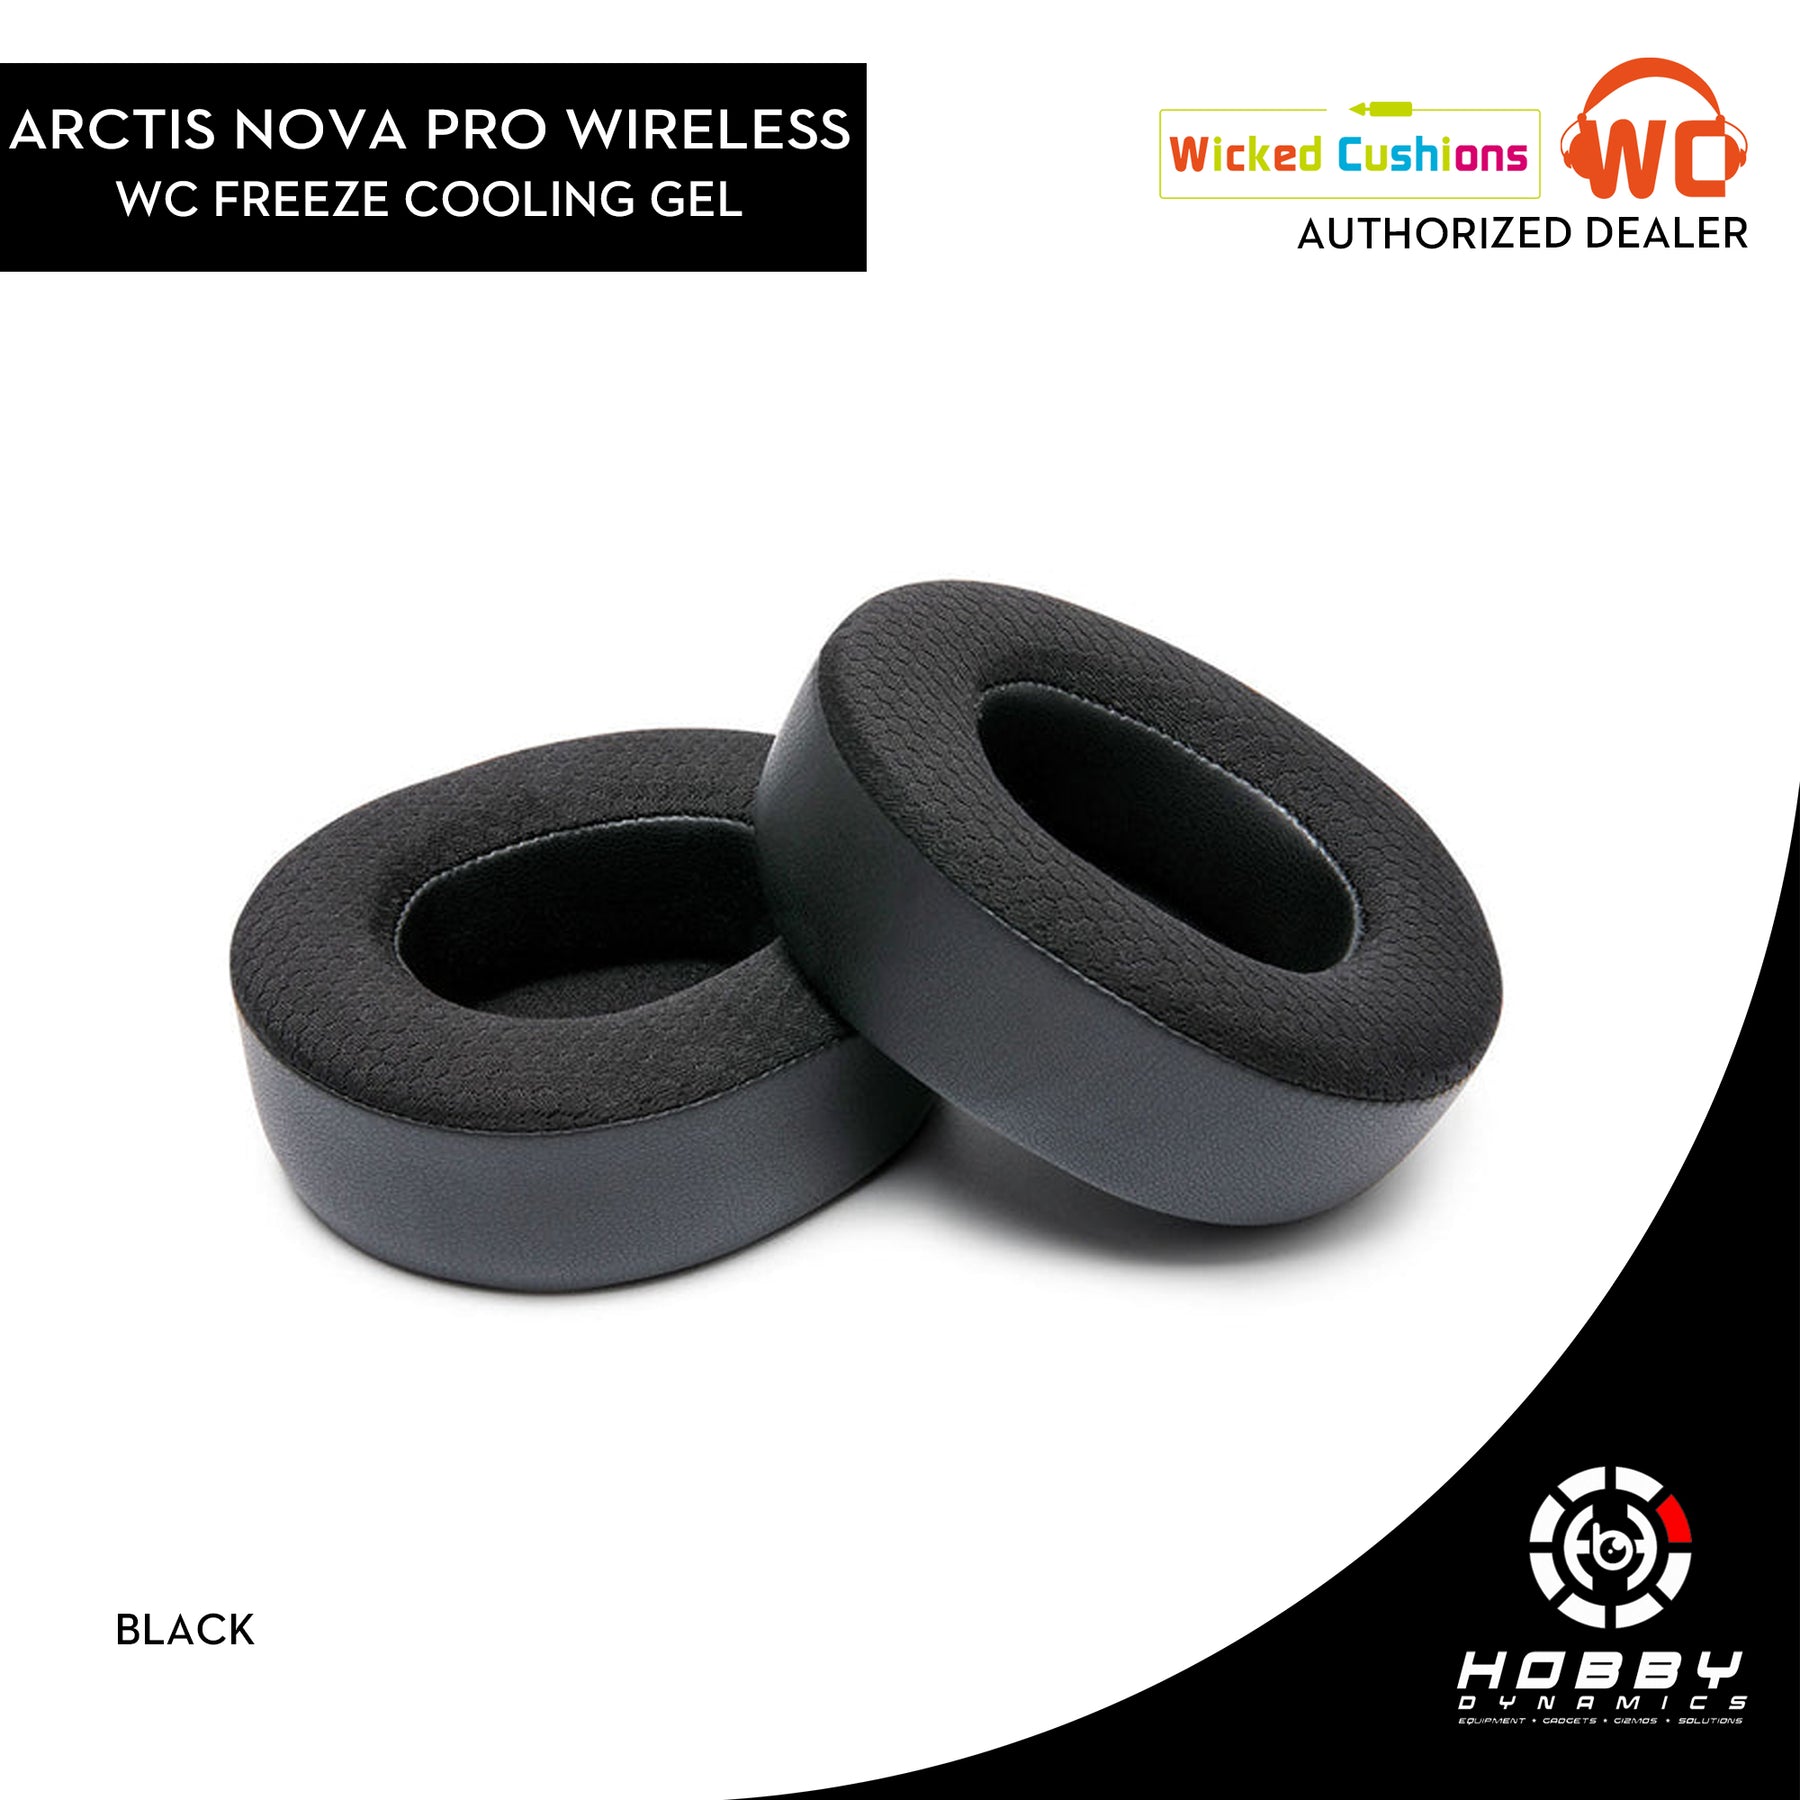 Big thanks for Wicked Cushions fixing the god awful comfort issues of the  Nova pro wireless. Ears no longer touch the nub, cups are deeper and wider.  The cooling gel was a